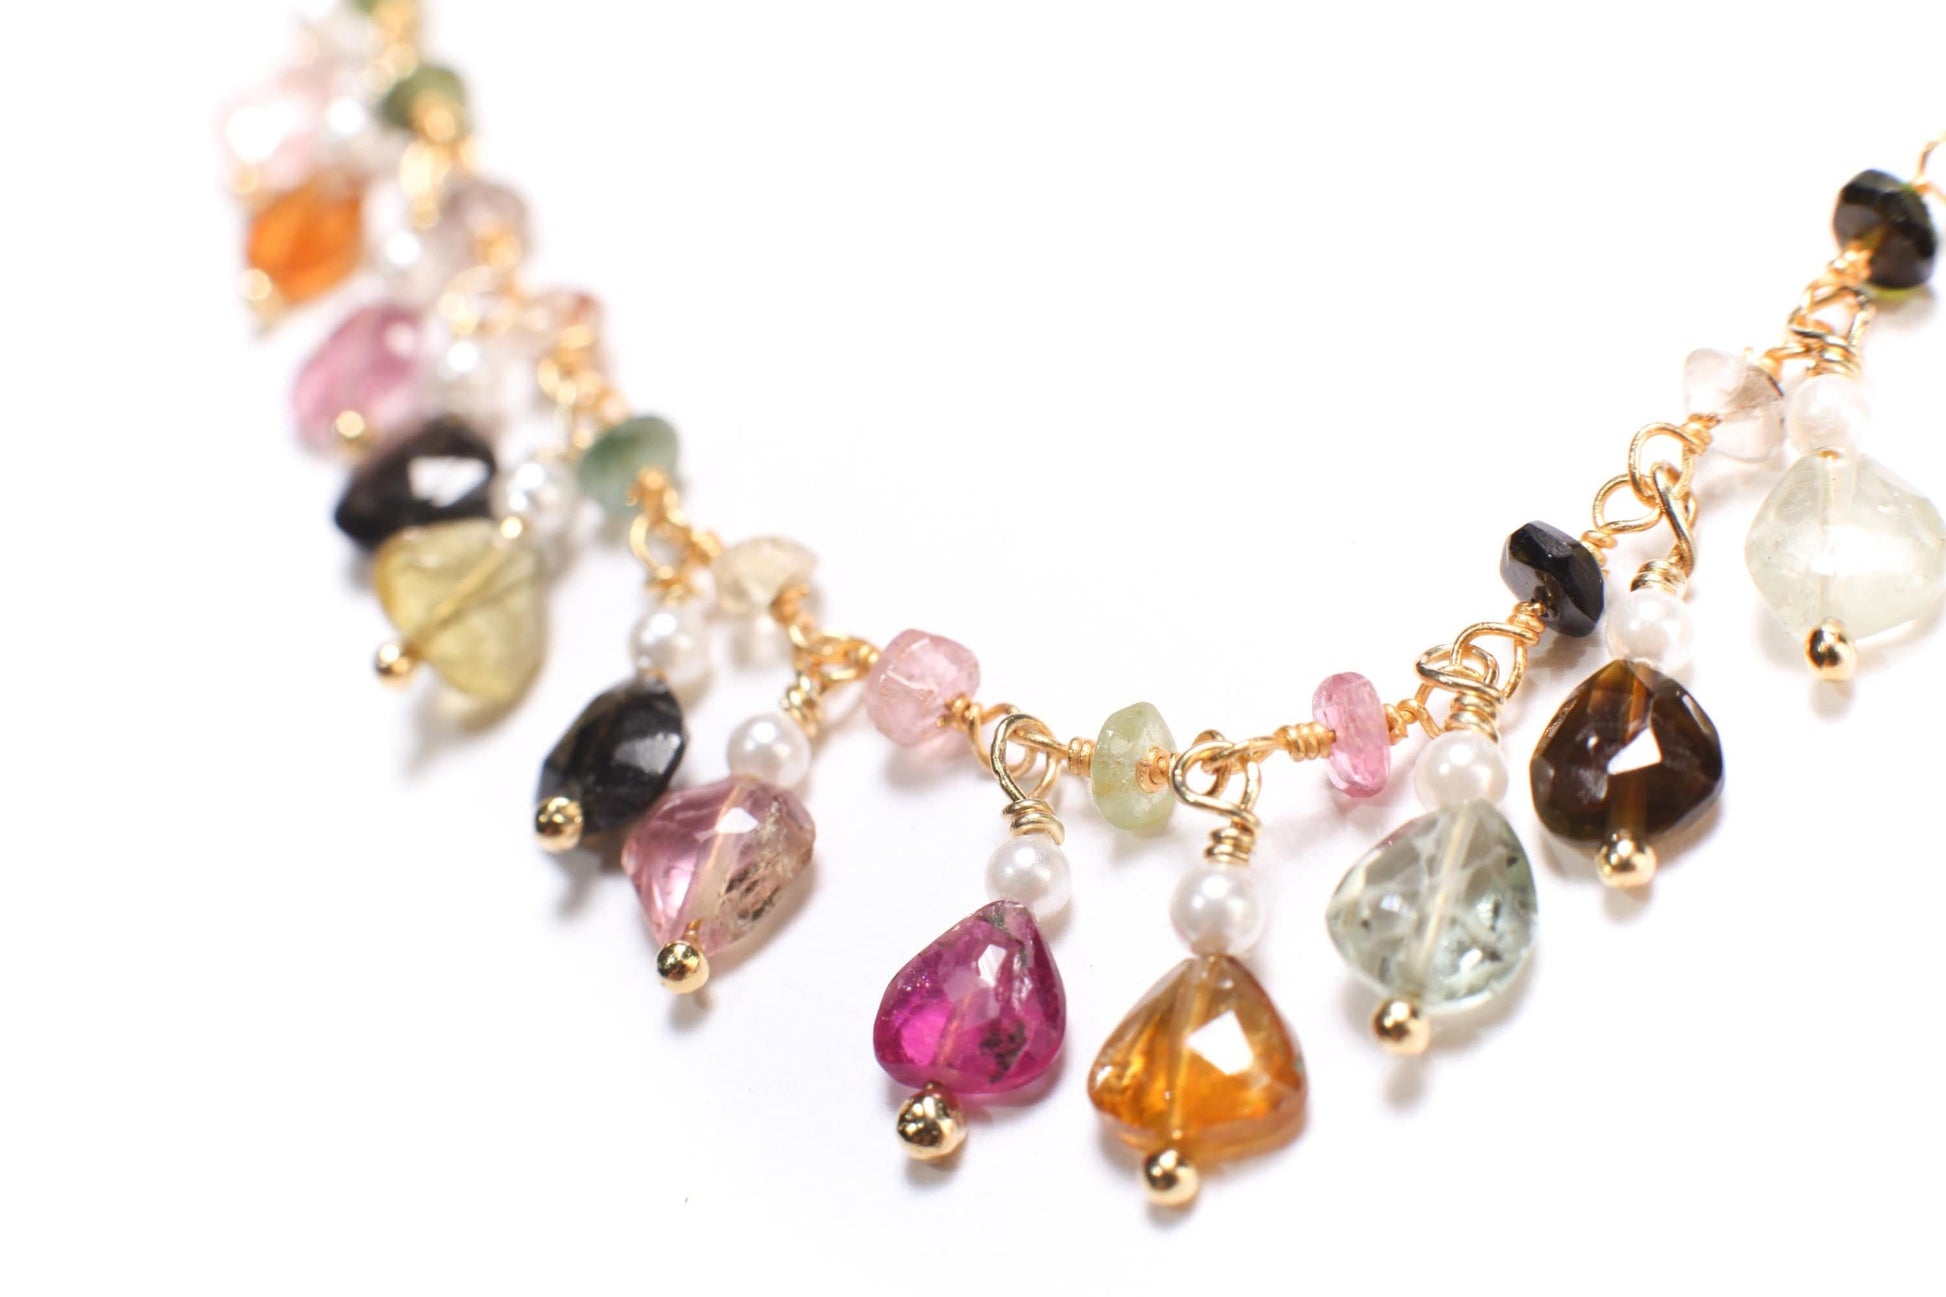 Multi Watermelon Tourmaline Faceted Heart Shape 5-6mm, Dangling Fresh Water Pearl Round Spacers in 14K Gold Filled Clasp, October Birthstone